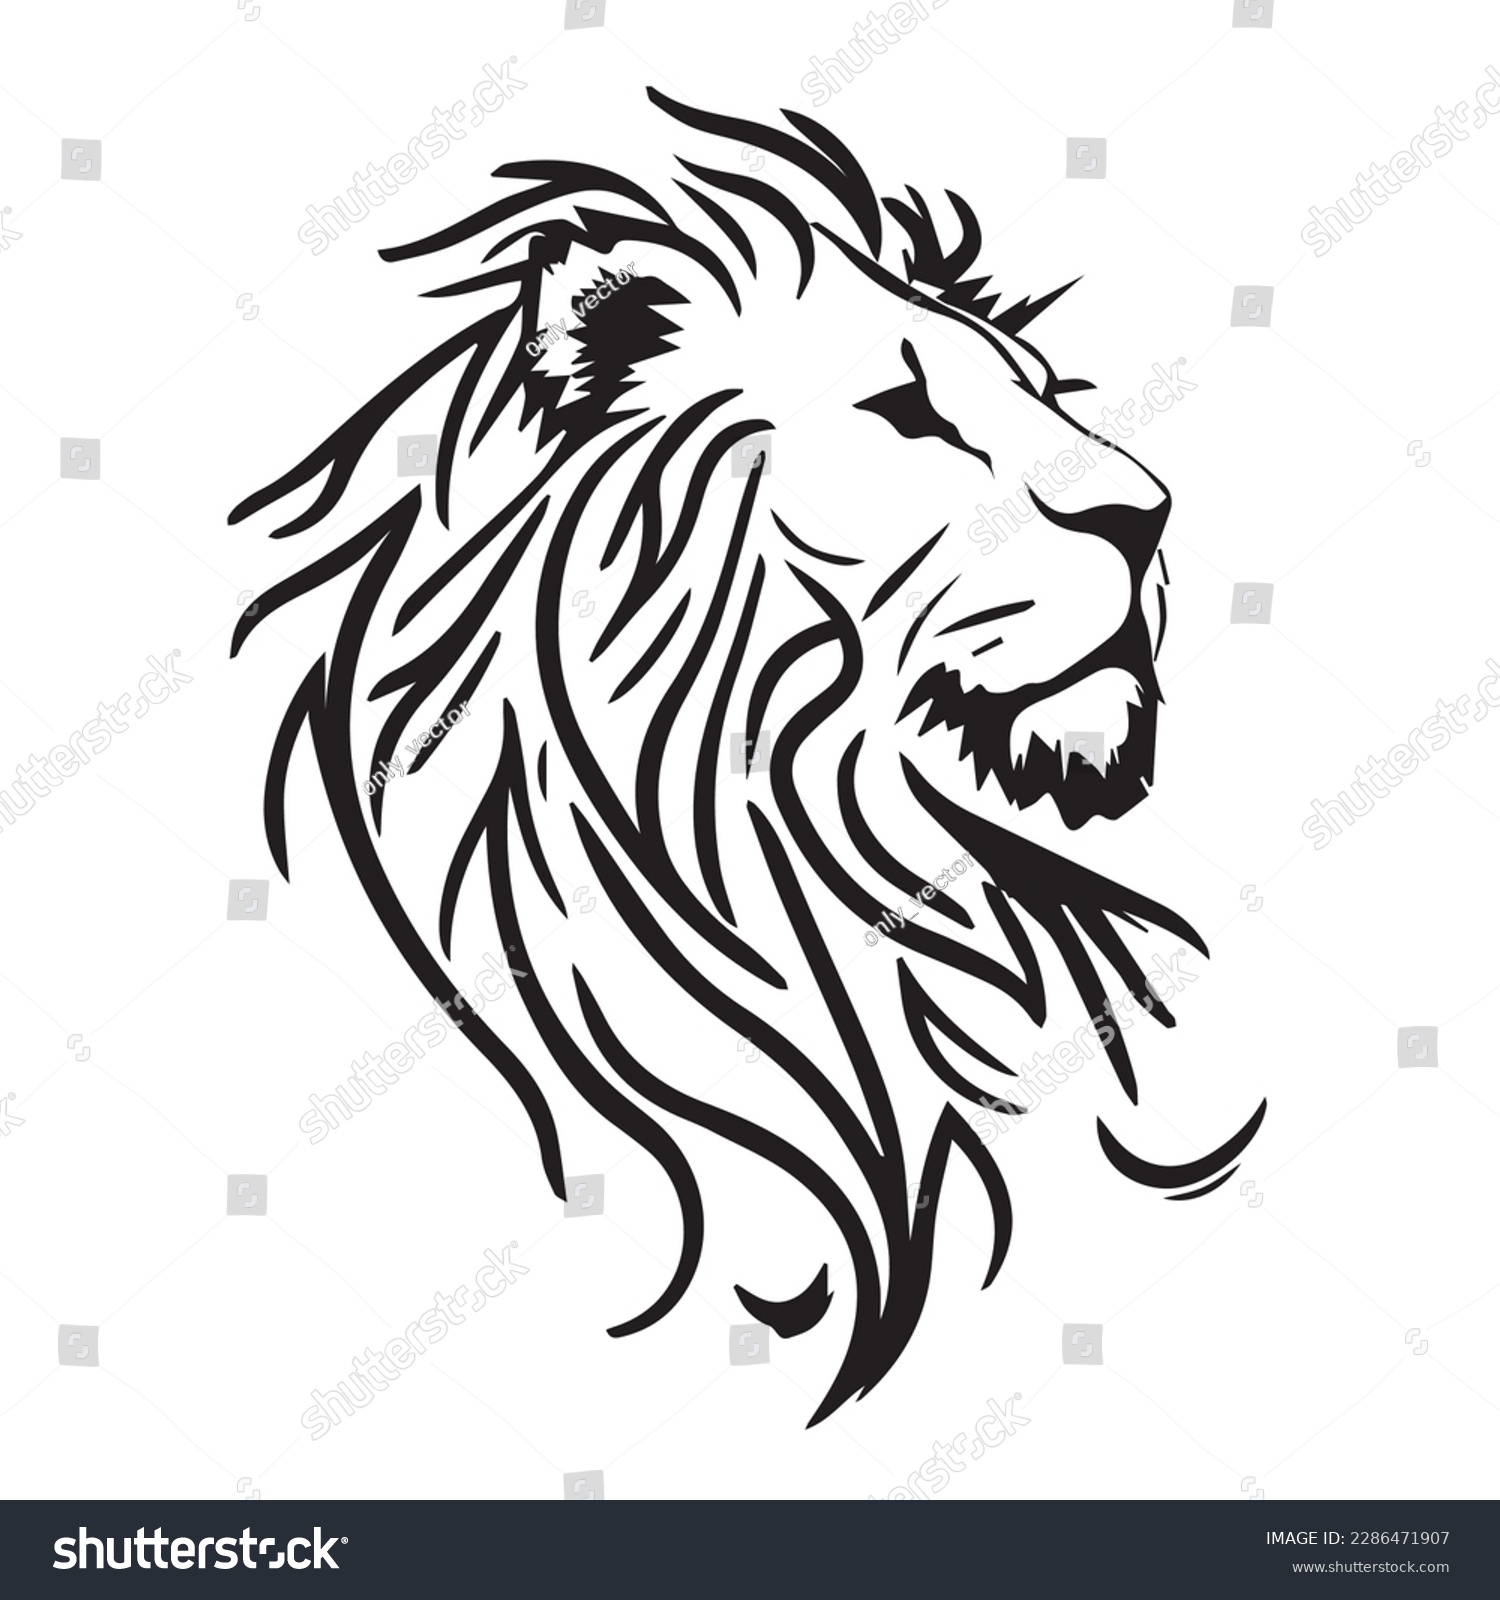 SVG of Lion head on a white background. Vector silhouette svg illustration. svg